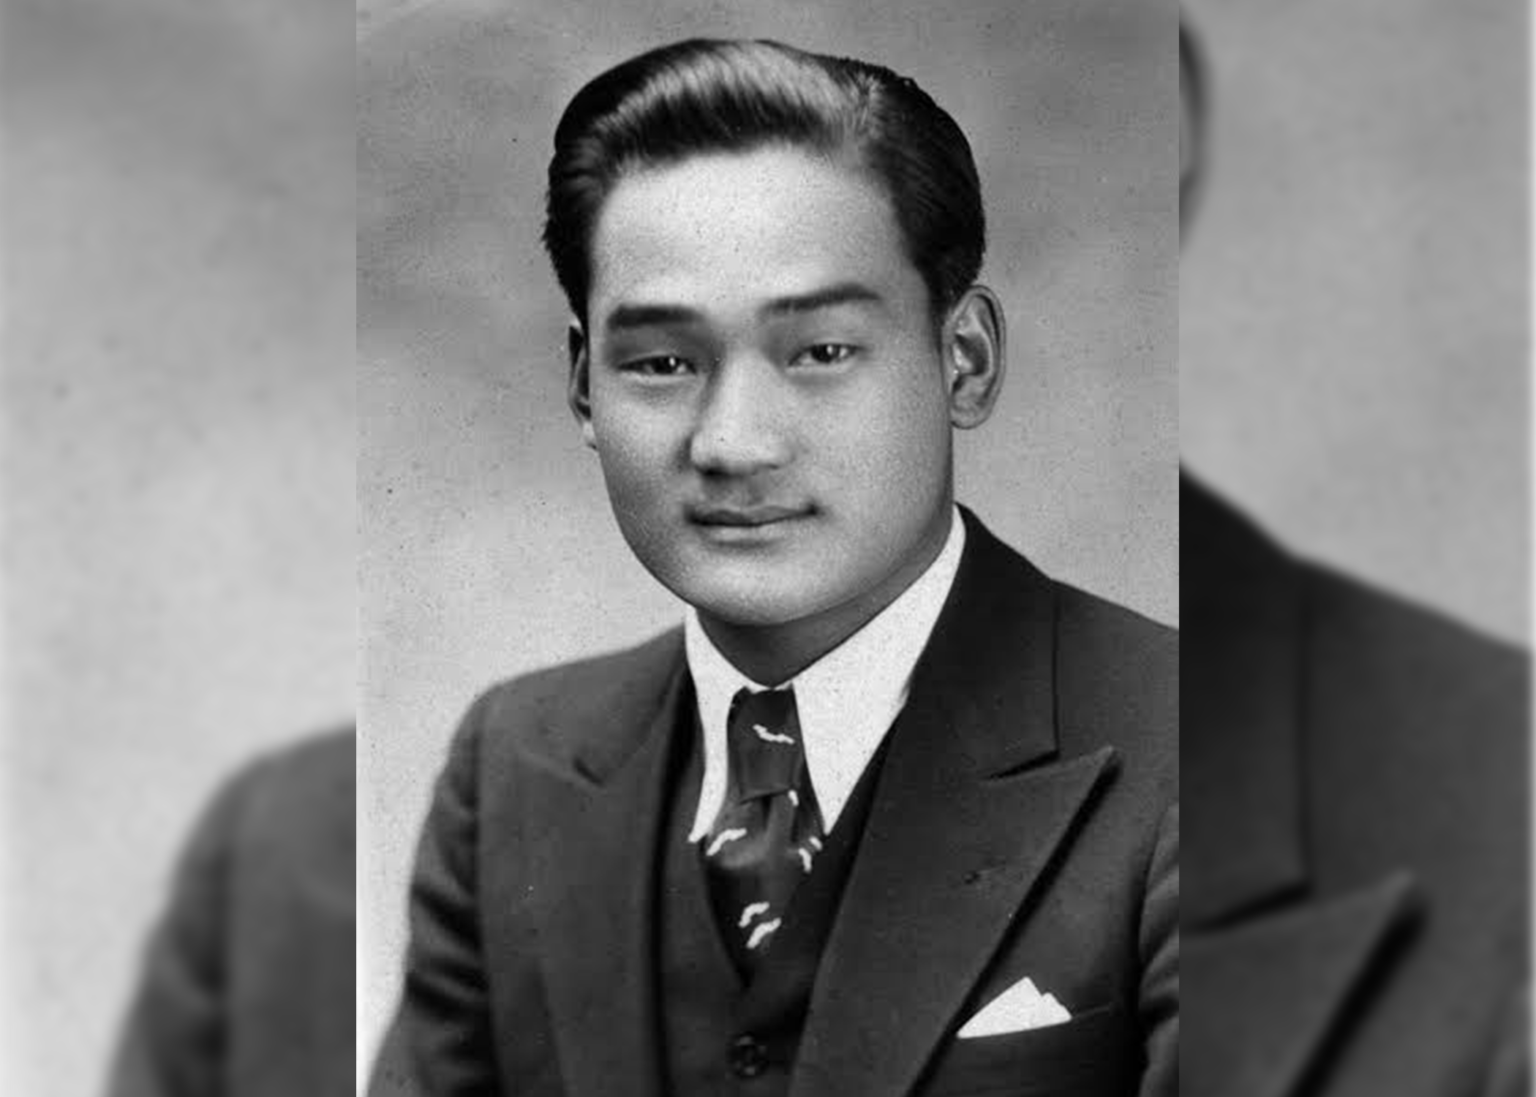 American lawyer and civil rights activist Minoru Yasui is posing for an official looking photo. He’s particularly known for challenging the discriminatory policies placed on Japanese Americans.